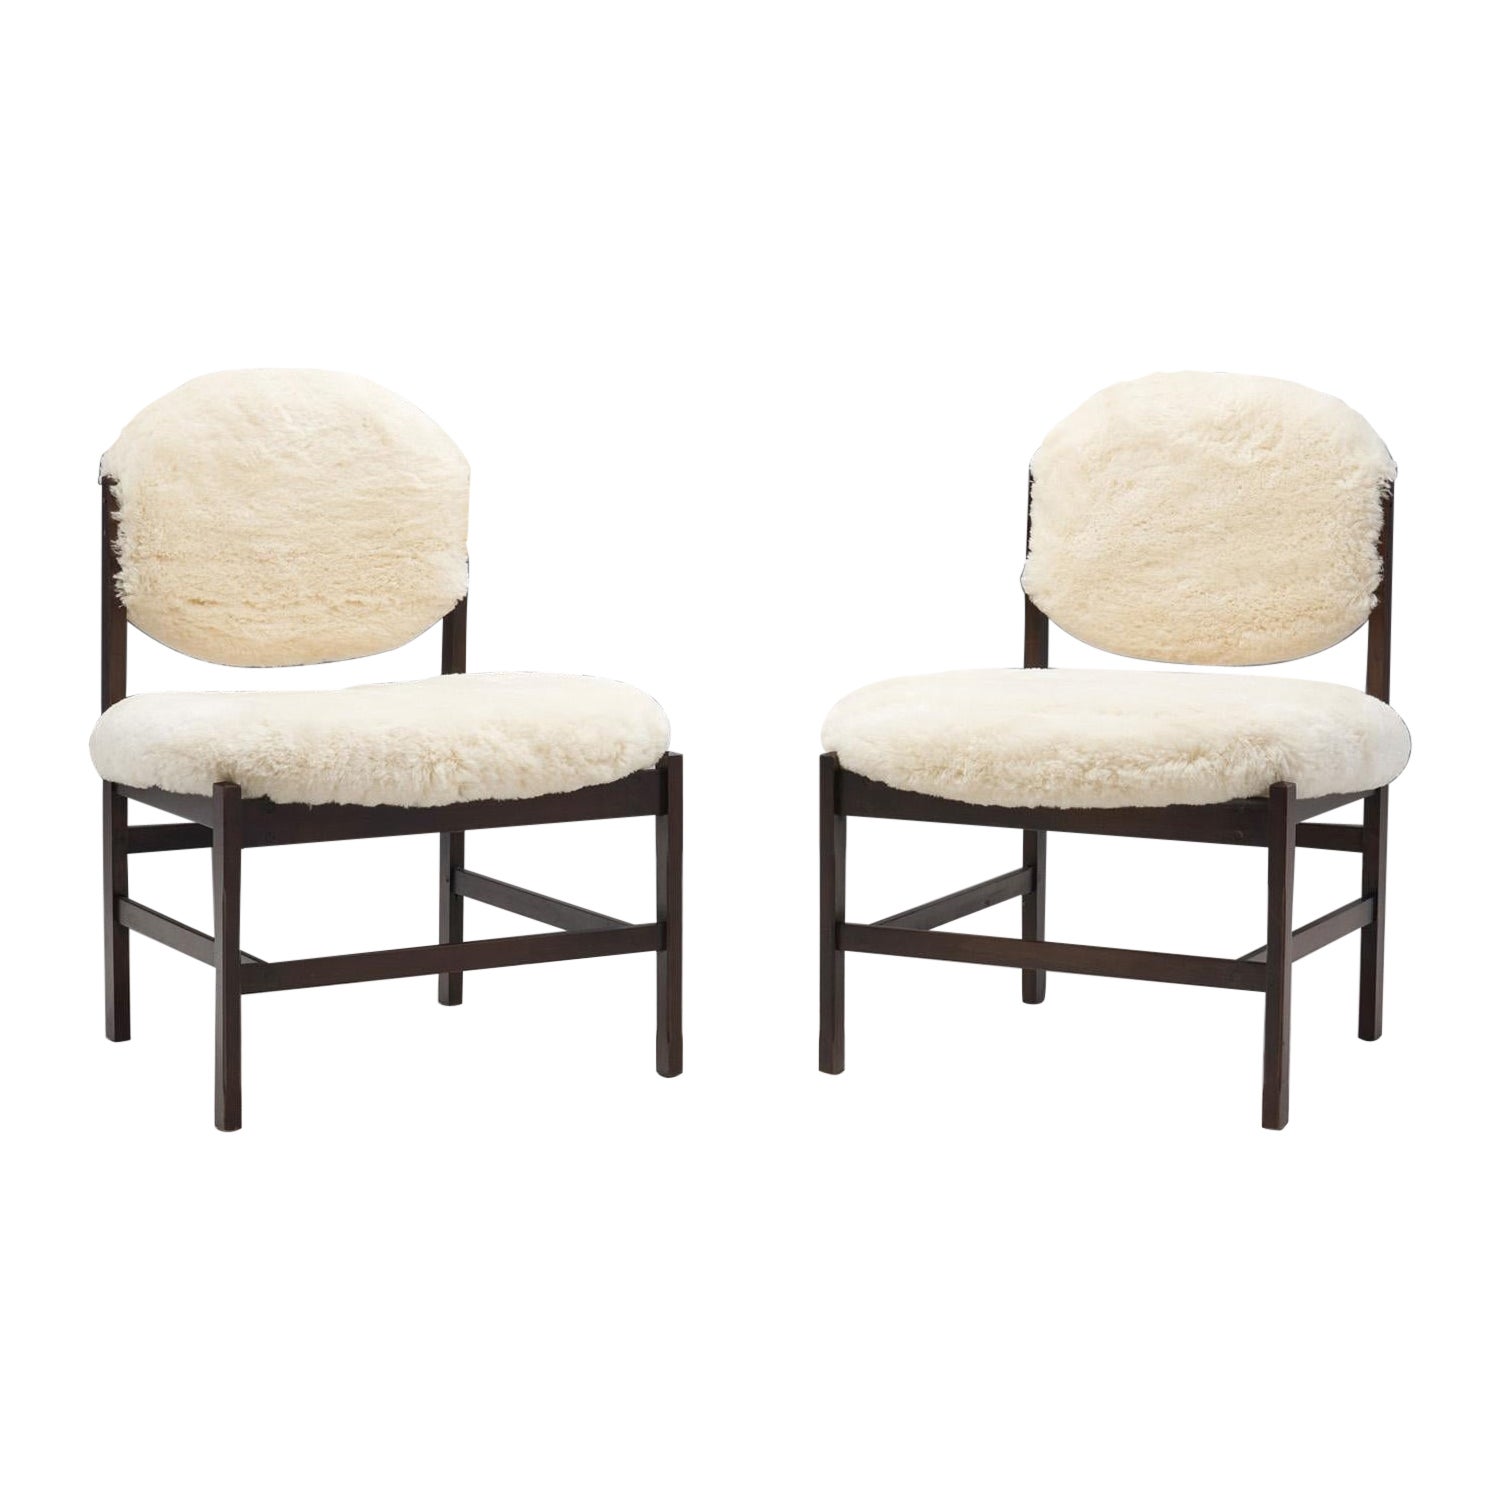 European Easy Chairs Upholstered in Wool, Europe ca 1950s For Sale